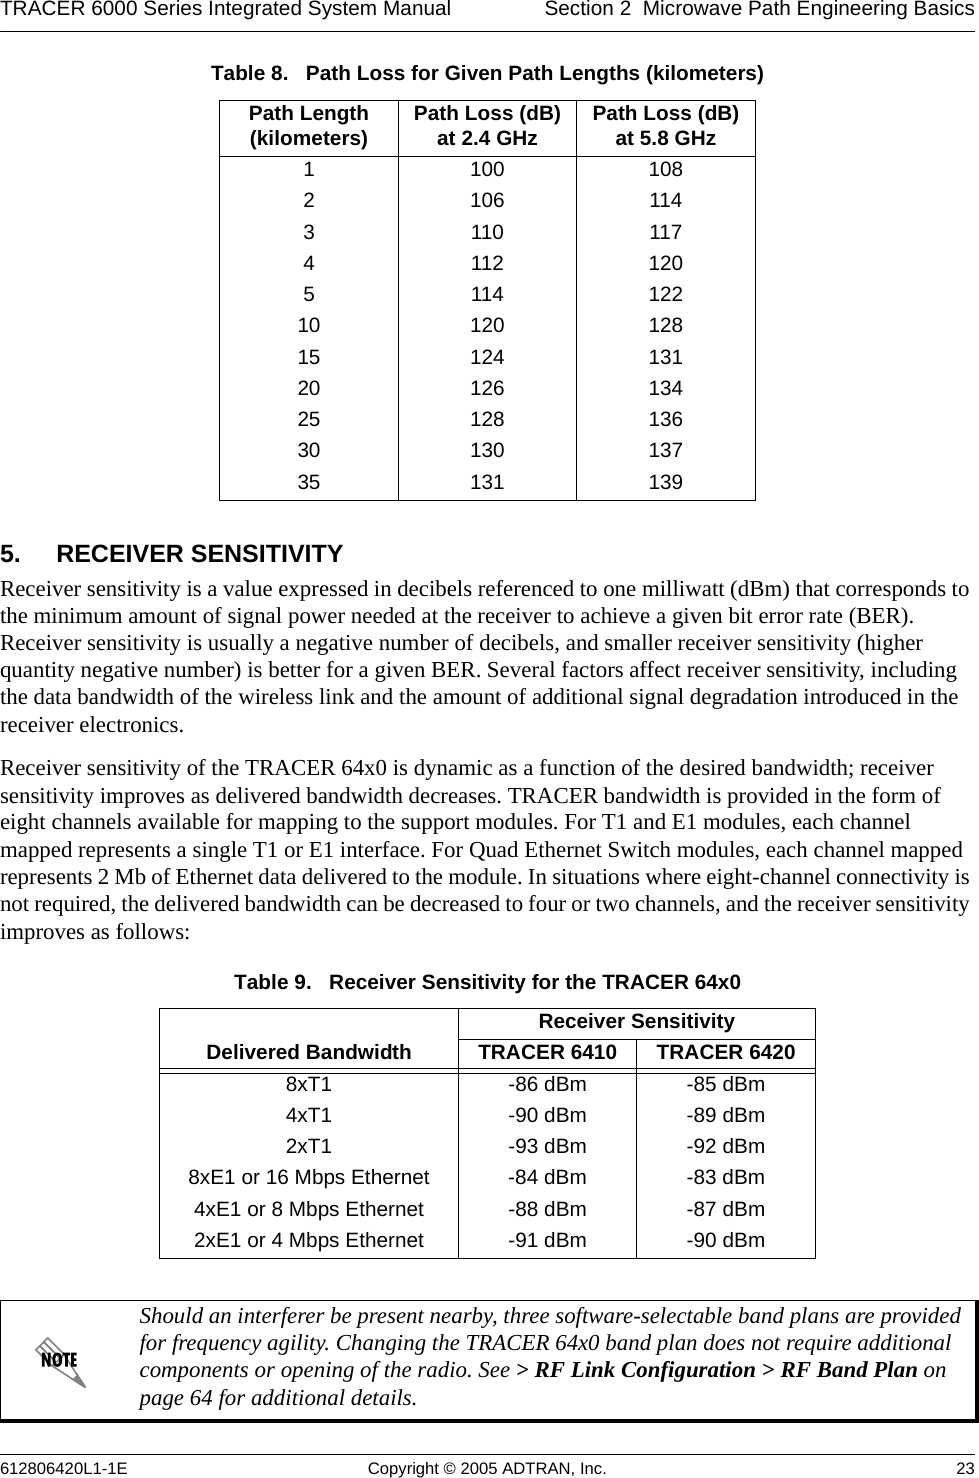 TRACER 6000 Series Integrated System Manual Section 2  Microwave Path Engineering Basics612806420L1-1E Copyright © 2005 ADTRAN, Inc. 235. RECEIVER SENSITIVITYReceiver sensitivity is a value expressed in decibels referenced to one milliwatt (dBm) that corresponds to the minimum amount of signal power needed at the receiver to achieve a given bit error rate (BER). Receiver sensitivity is usually a negative number of decibels, and smaller receiver sensitivity (higher quantity negative number) is better for a given BER. Several factors affect receiver sensitivity, including the data bandwidth of the wireless link and the amount of additional signal degradation introduced in the receiver electronics.Receiver sensitivity of the TRACER 64x0 is dynamic as a function of the desired bandwidth; receiver sensitivity improves as delivered bandwidth decreases. TRACER bandwidth is provided in the form of eight channels available for mapping to the support modules. For T1 and E1 modules, each channel mapped represents a single T1 or E1 interface. For Quad Ethernet Switch modules, each channel mapped represents 2 Mb of Ethernet data delivered to the module. In situations where eight-channel connectivity is not required, the delivered bandwidth can be decreased to four or two channels, and the receiver sensitivity improves as follows:Table 8.   Path Loss for Given Path Lengths (kilometers)Path Length(kilometers) Path Loss (dB) at 2.4 GHz Path Loss (dB) at 5.8 GHz1100 1082106 1143110 1174112 1205114 12210 120 12815 124 13120 126 13425 128 13630 130 13735 131 139Table 9.   Receiver Sensitivity for the TRACER 64x0Delivered BandwidthReceiver SensitivityTRACER 6410 TRACER 64208xT1 -86 dBm -85 dBm4xT1 -90 dBm -89 dBm2xT1 -93 dBm -92 dBm8xE1 or 16 Mbps Ethernet -84 dBm -83 dBm4xE1 or 8 Mbps Ethernet -88 dBm -87 dBm2xE1 or 4 Mbps Ethernet -91 dBm -90 dBmShould an interferer be present nearby, three software-selectable band plans are provided for frequency agility. Changing the TRACER 64x0 band plan does not require additional components or opening of the radio. See &gt; RF Link Configuration &gt; RF Band Plan on page 64 for additional details.